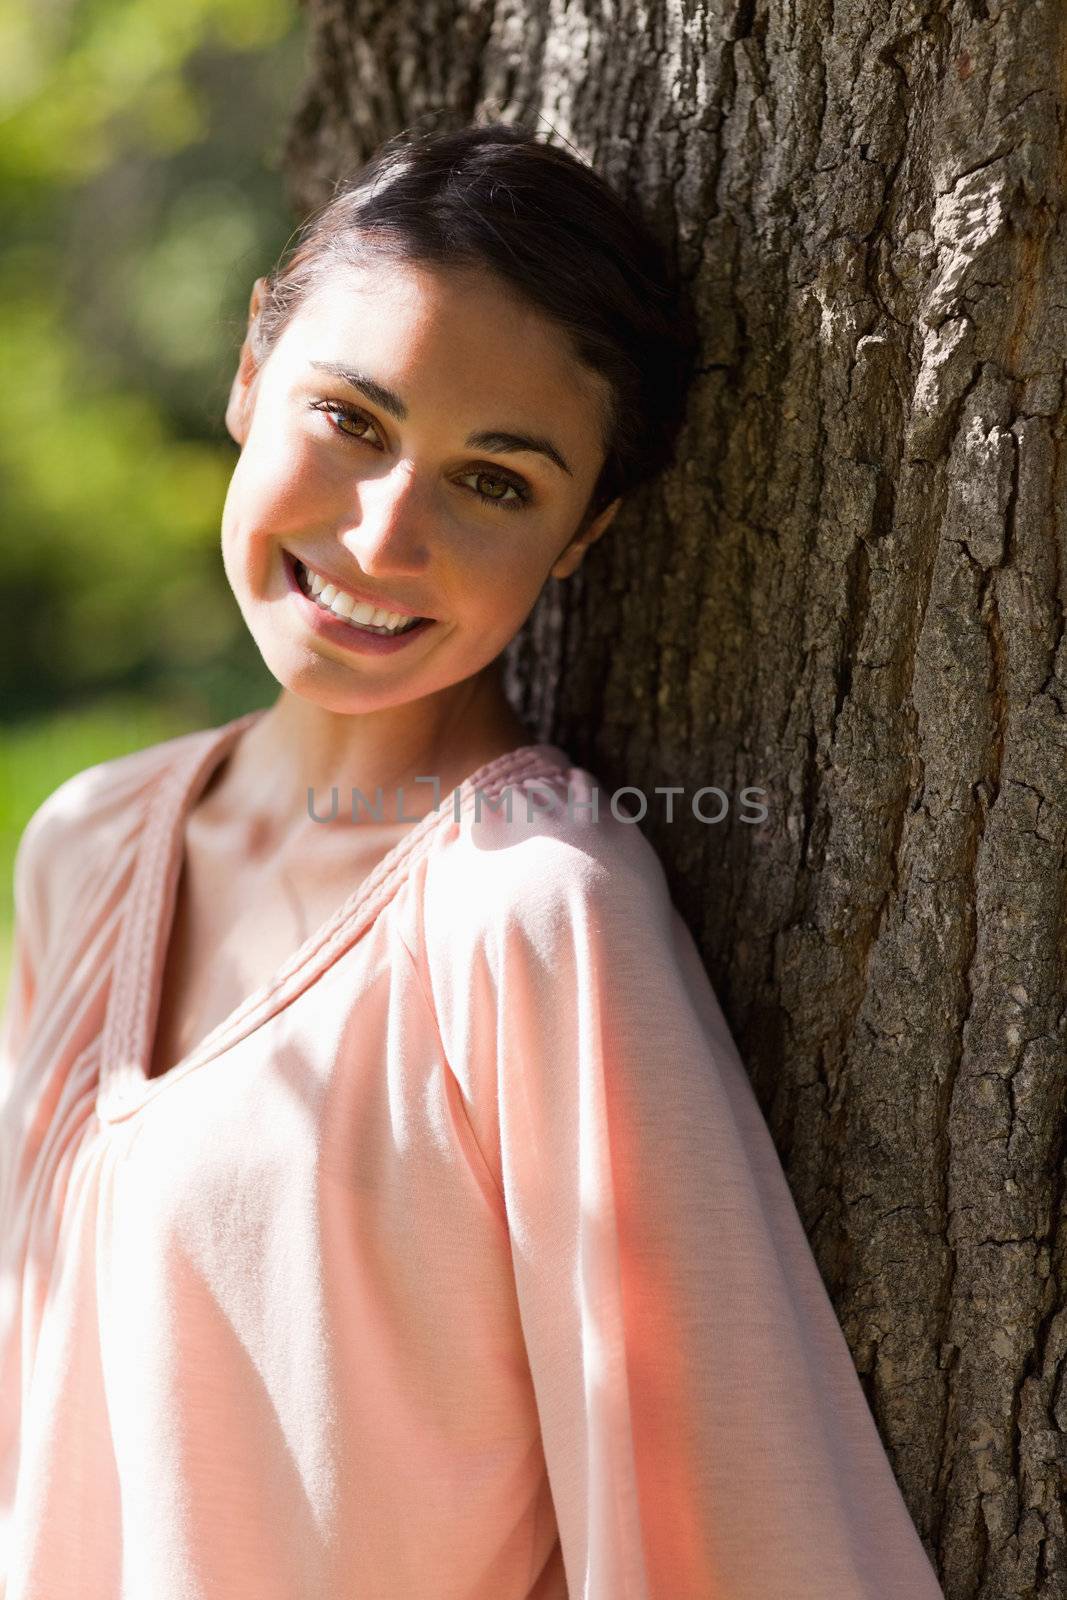 Woman looking towards the side while smiling as she sits against the trunk of a tree